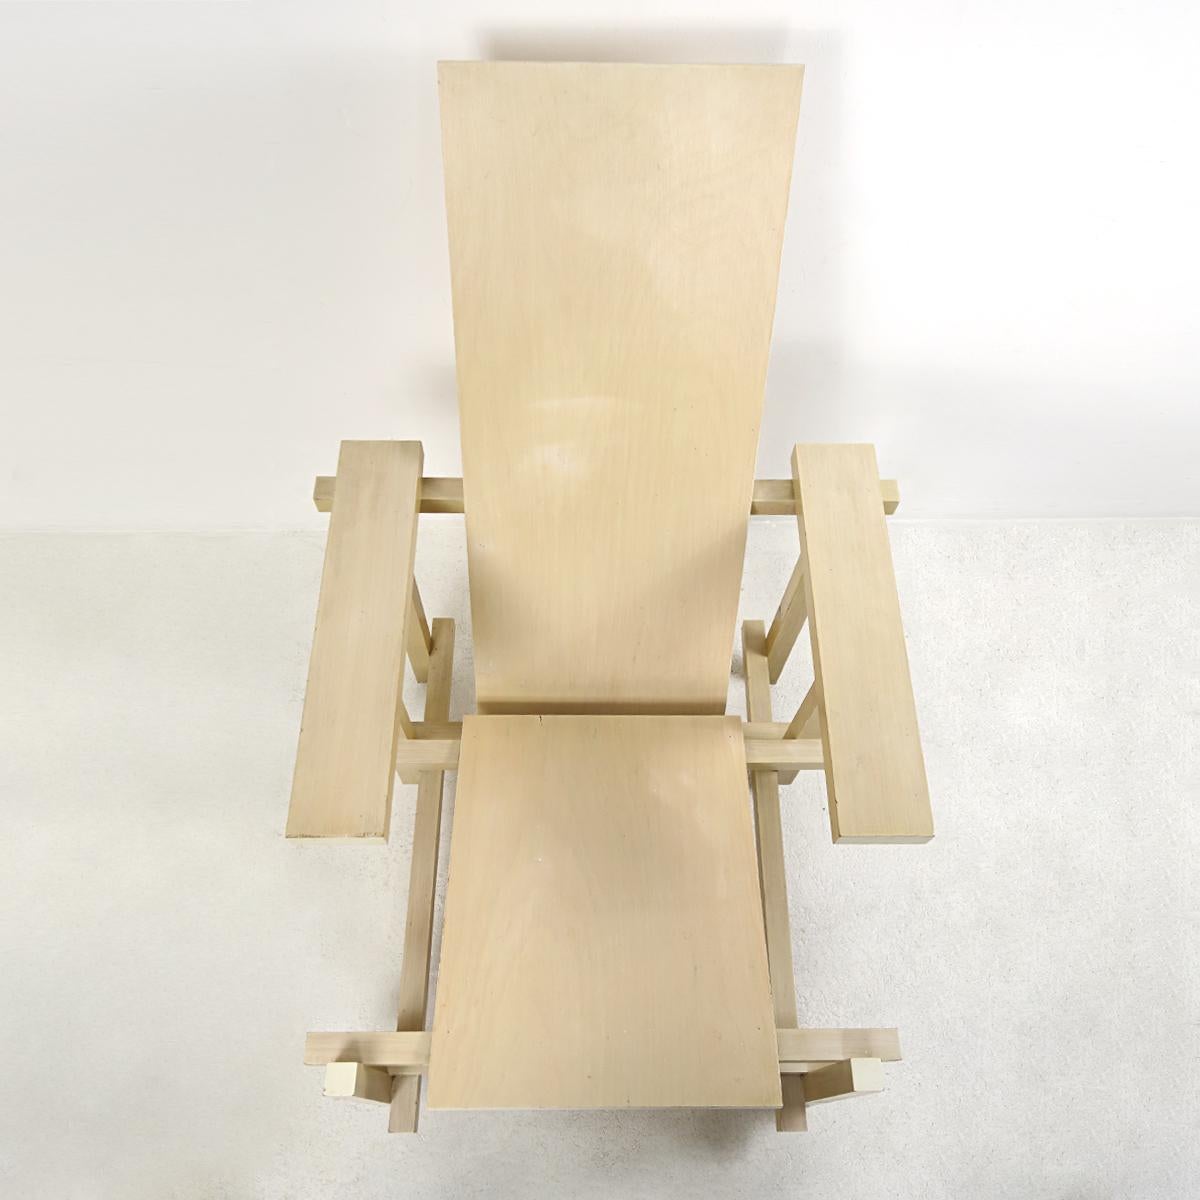 Modernist Chair Made of Uncolored Lacquered Wood after Gerrit Rietveld's Design 9